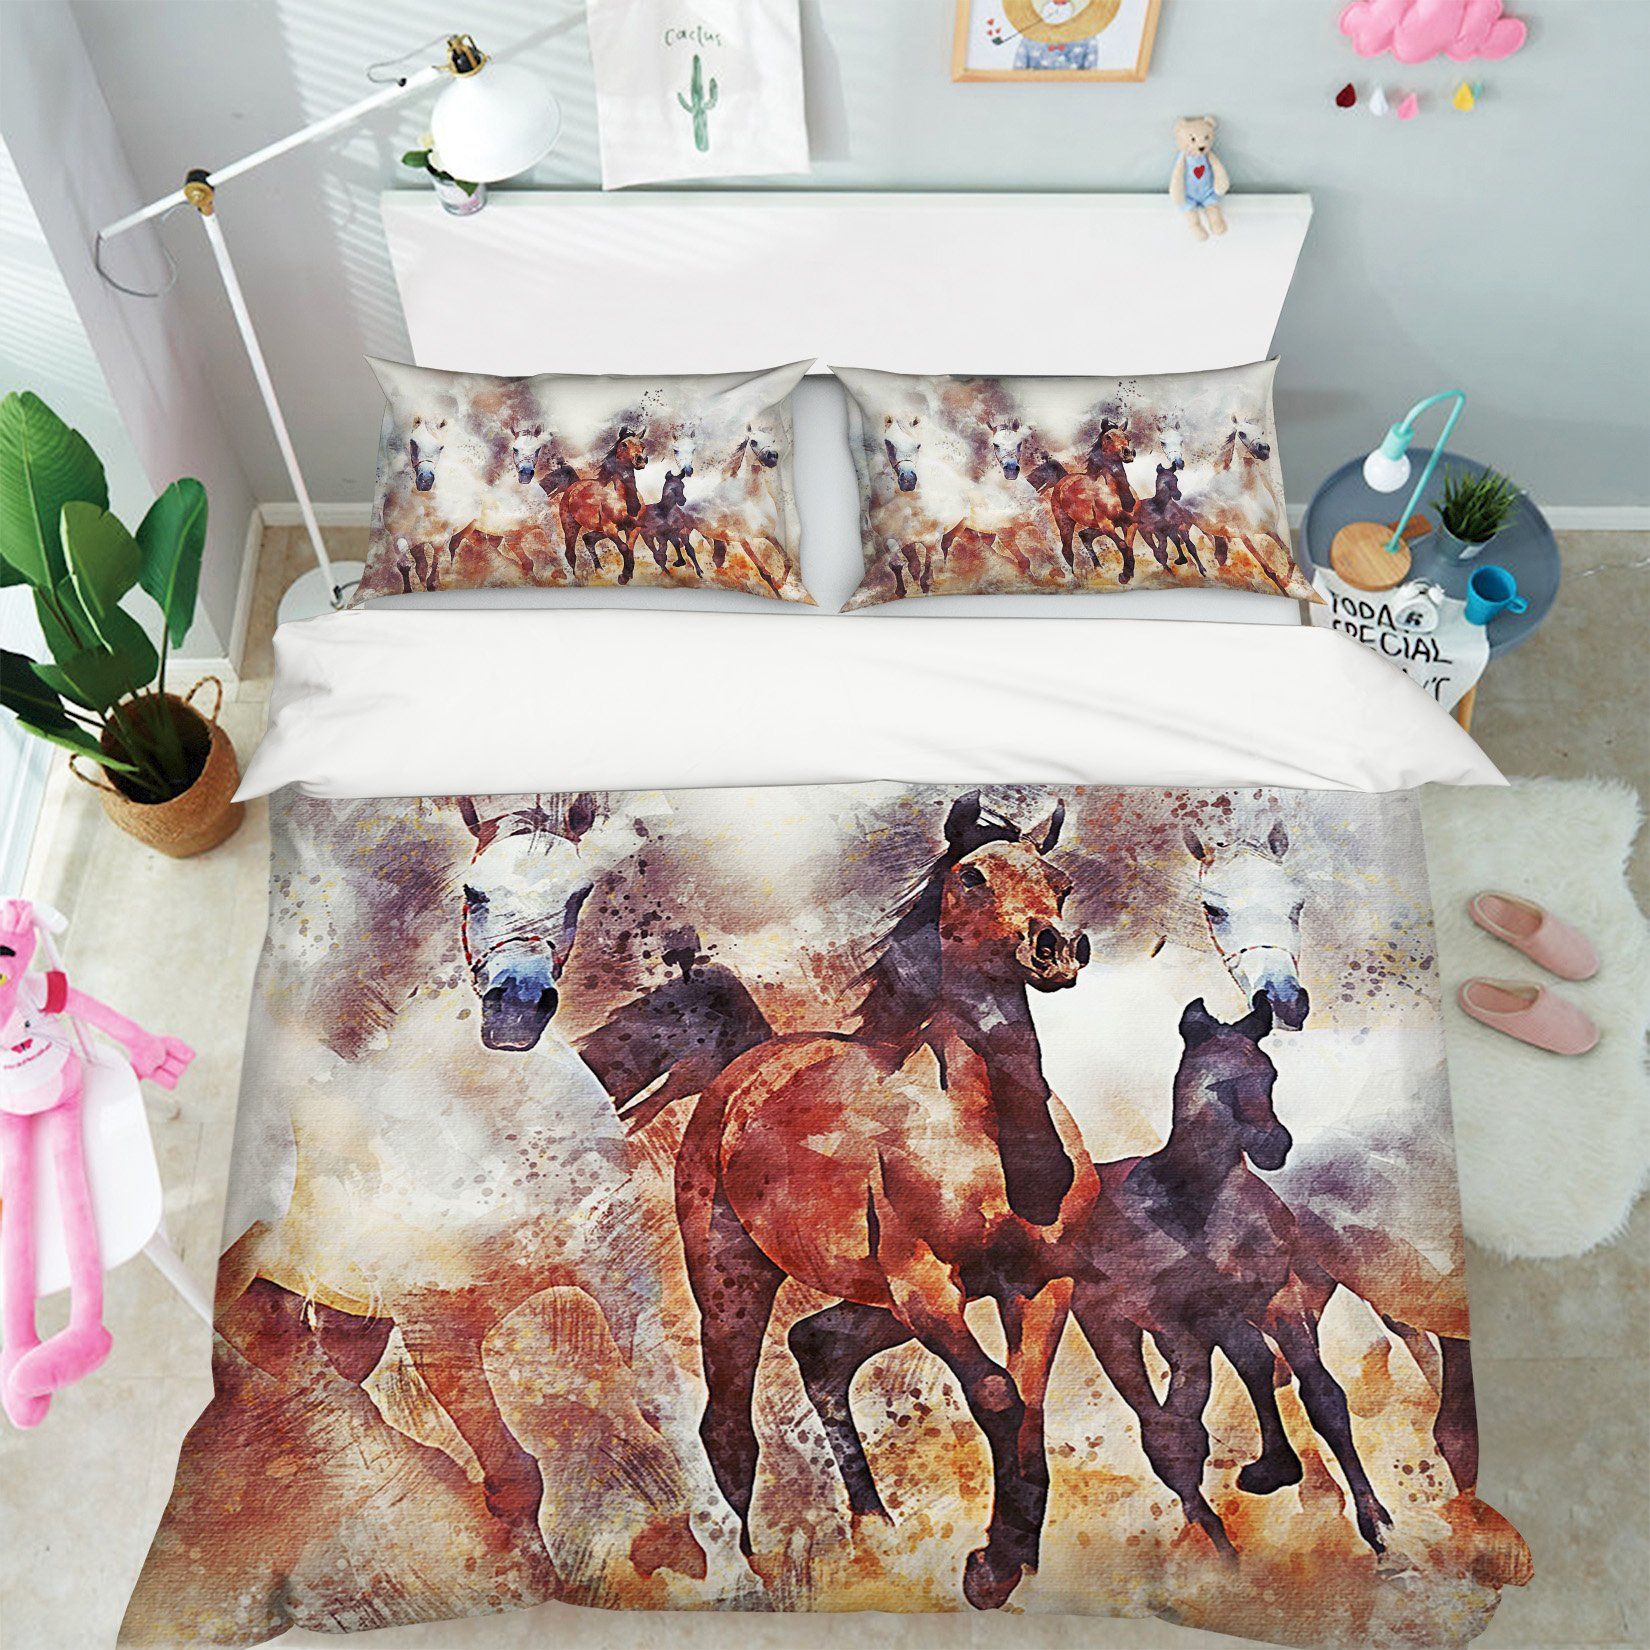 3D Horse Running 1965 Bed Pillowcases Quilt Quiet Covers AJ Creativity Home 